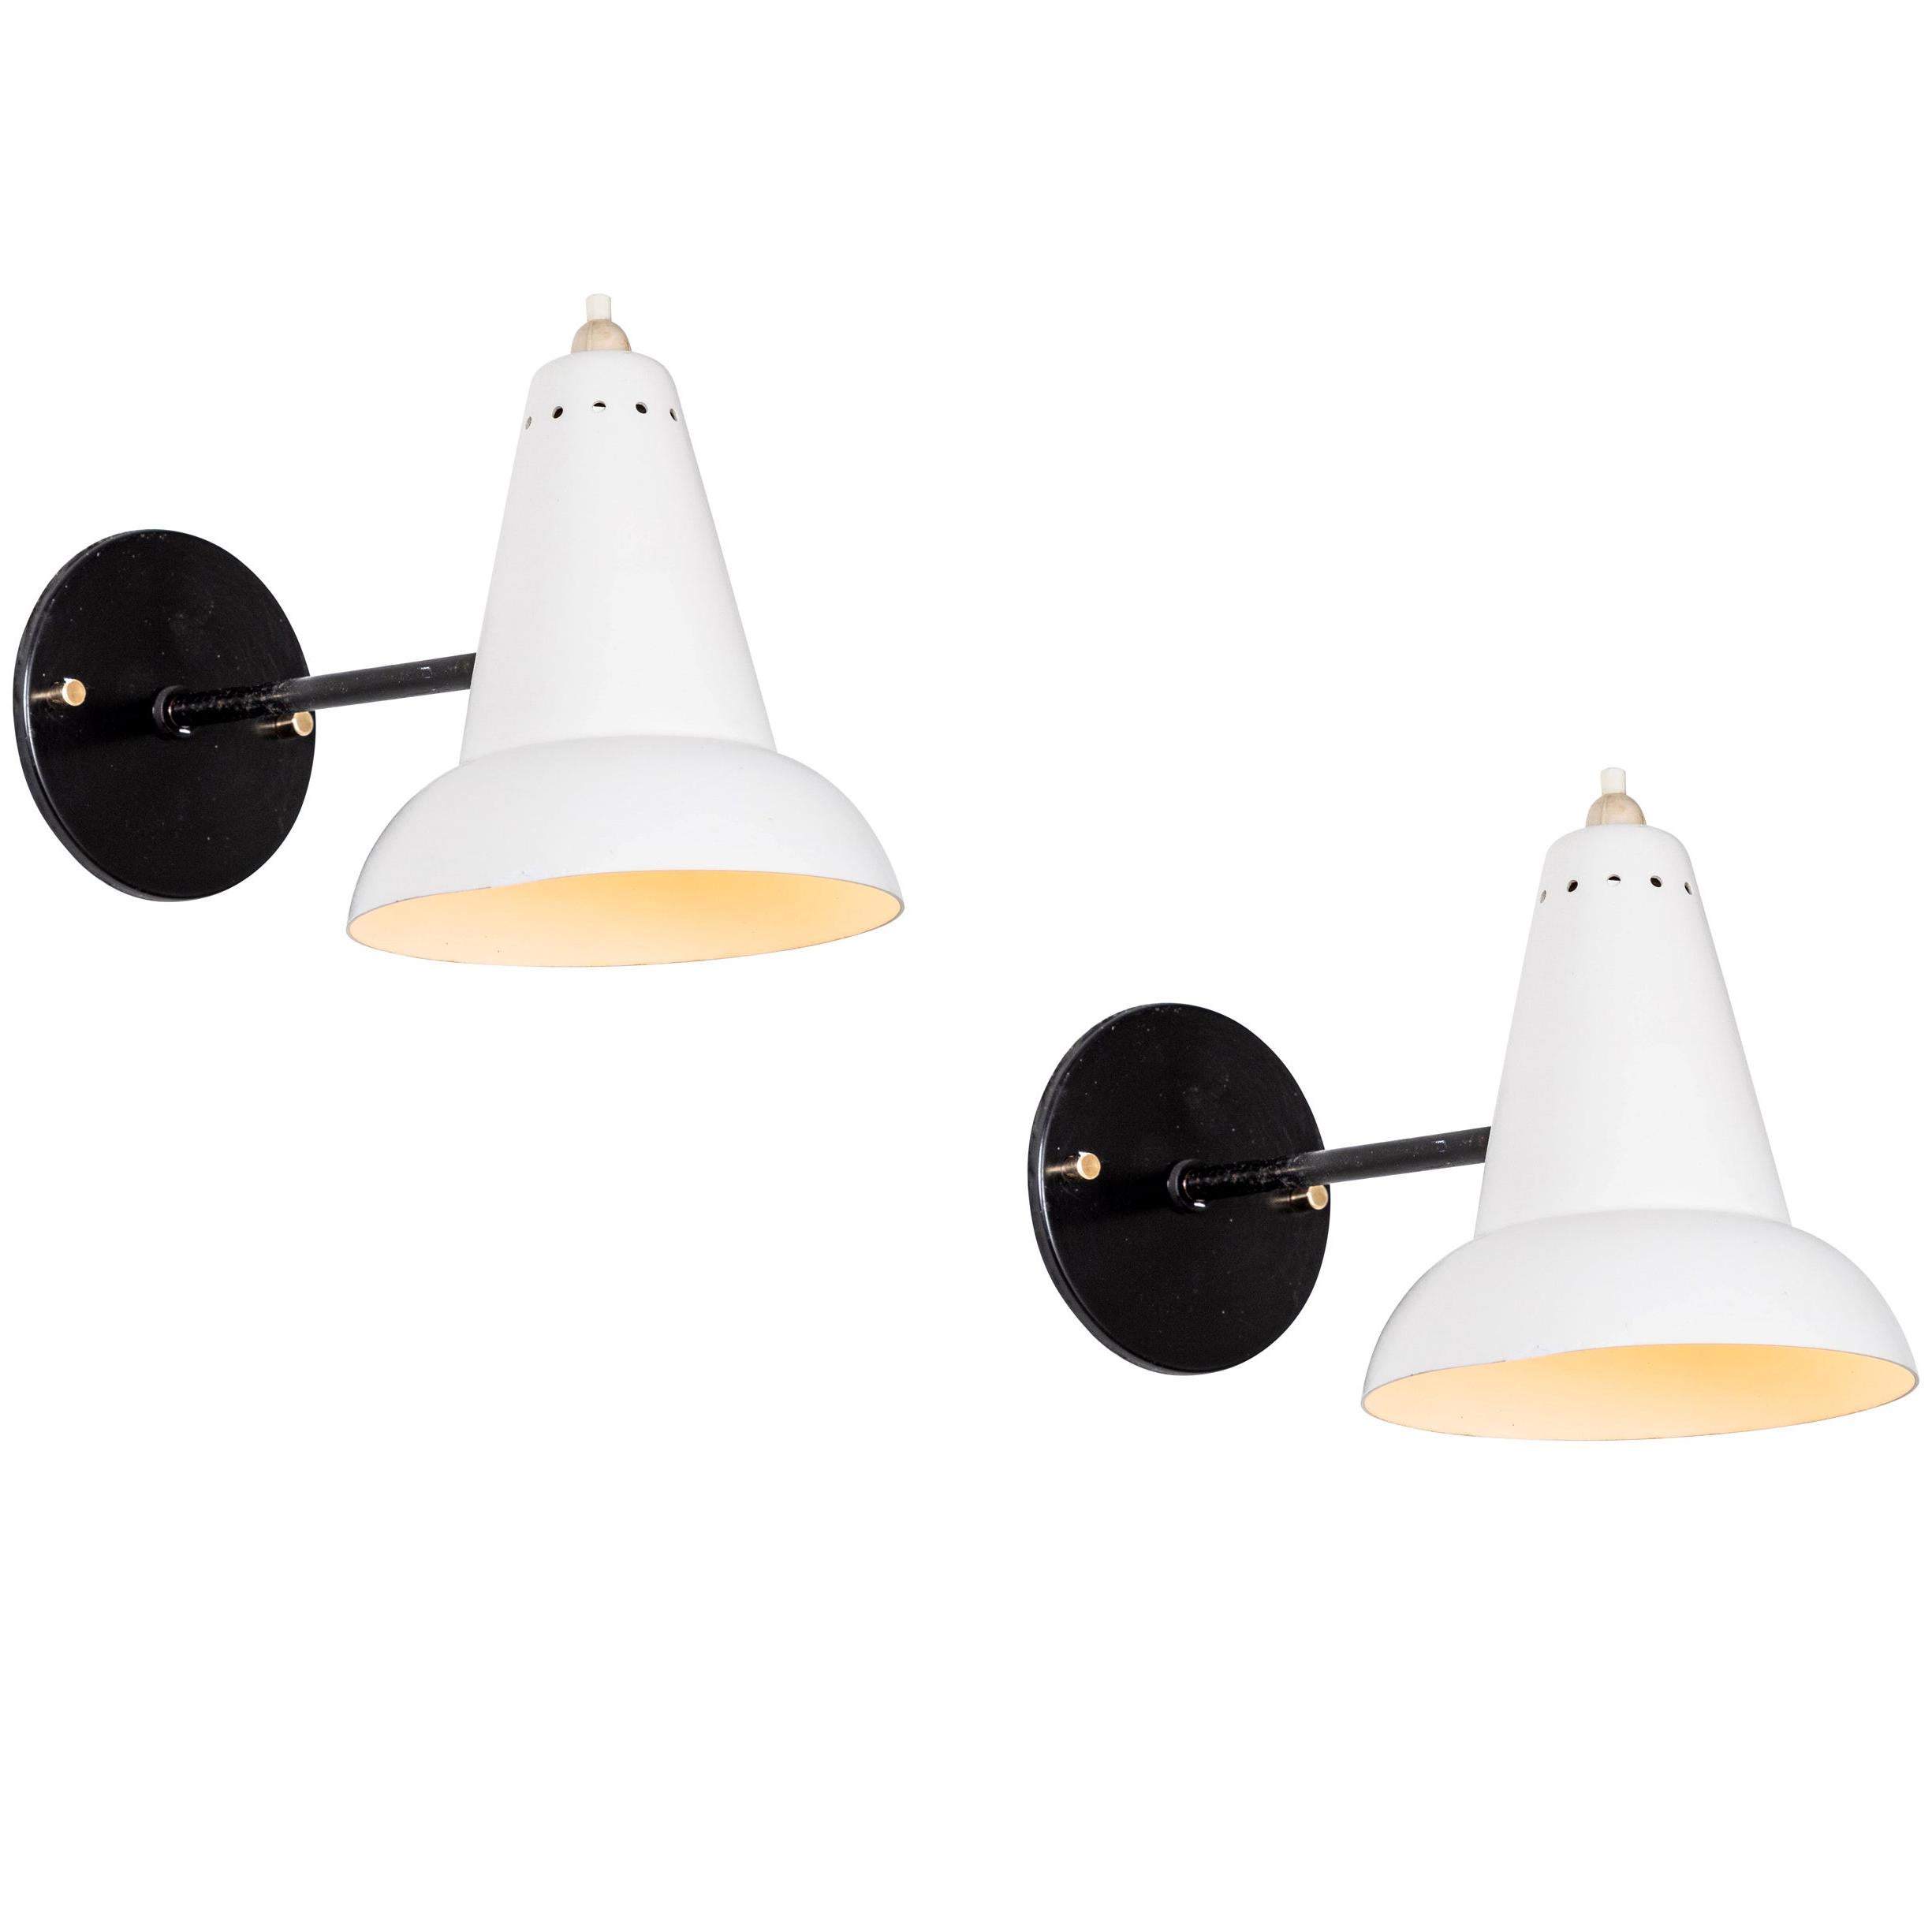 1950s Italian white articulating sconces attributed to Gino Sarfatti. Executed in brass and white painted aluminum. Sconces pivot up or down and left or right on a ball joint. Custom black backplates with brass hardware for hardwiring mounting over